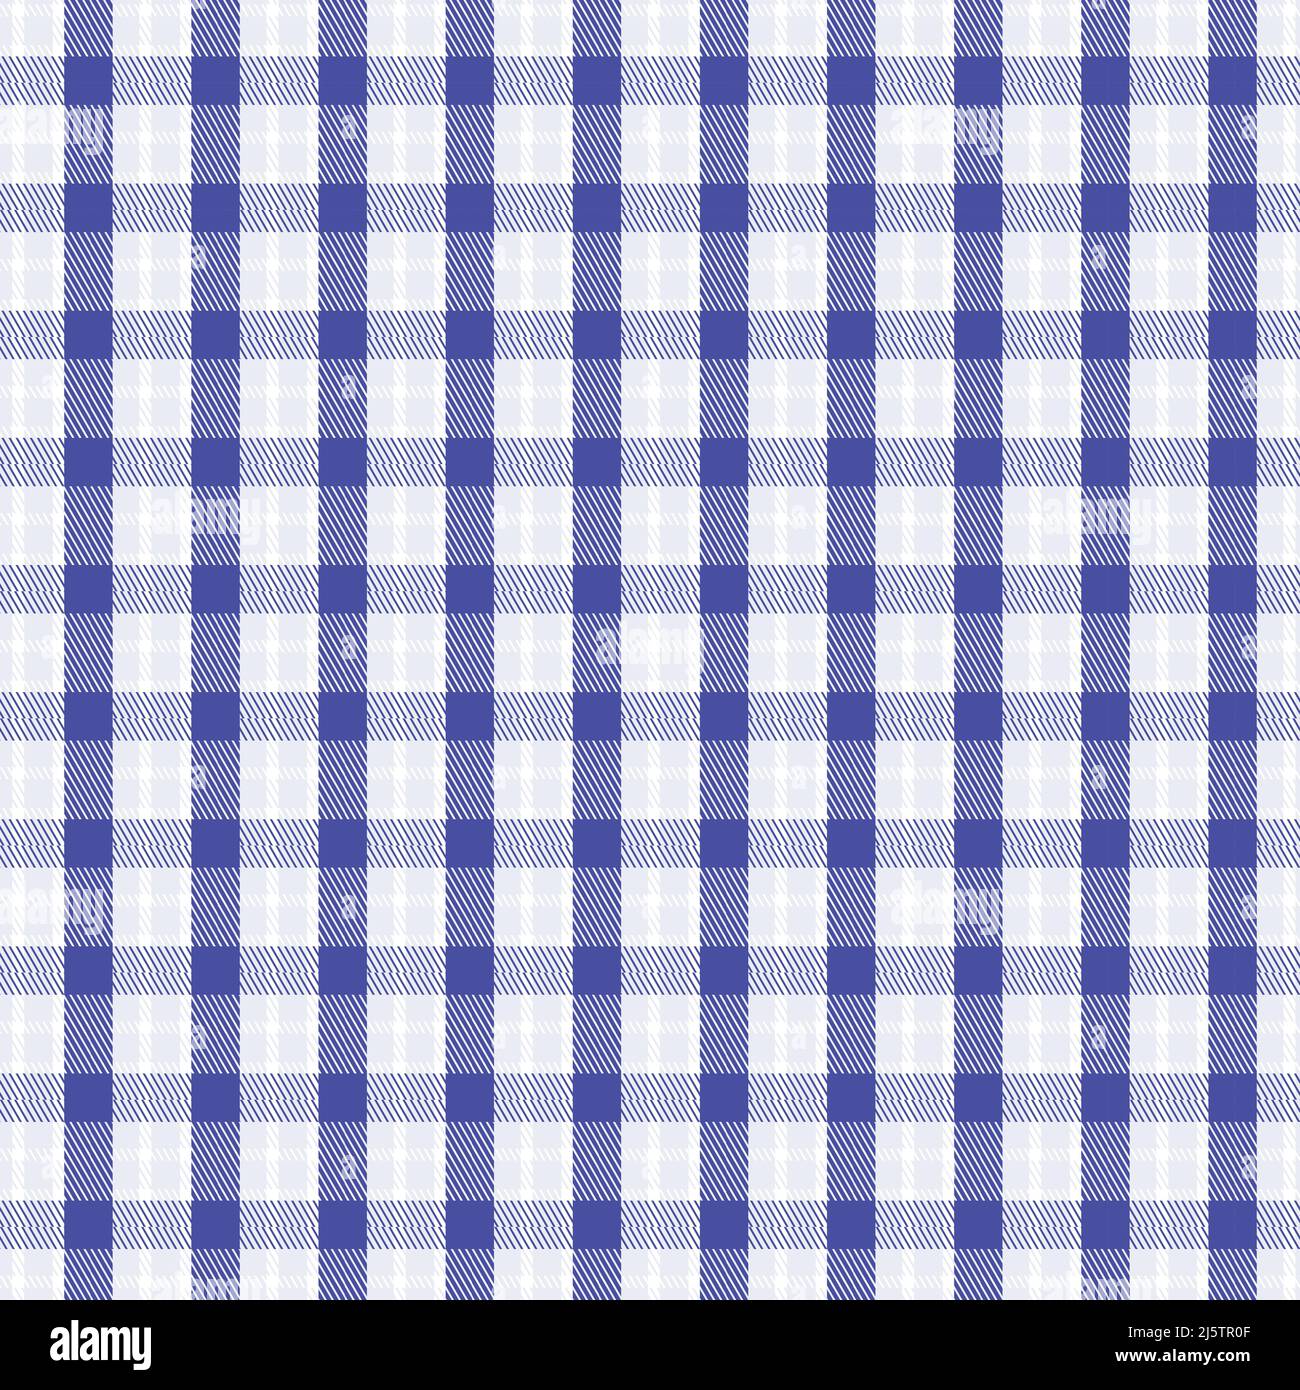 Plaid checkered fabric pattern. Modern plaid design for shirts, skirts, tablecloths, flannel, and blanket. Vector illustration. eps 10 Stock Vector